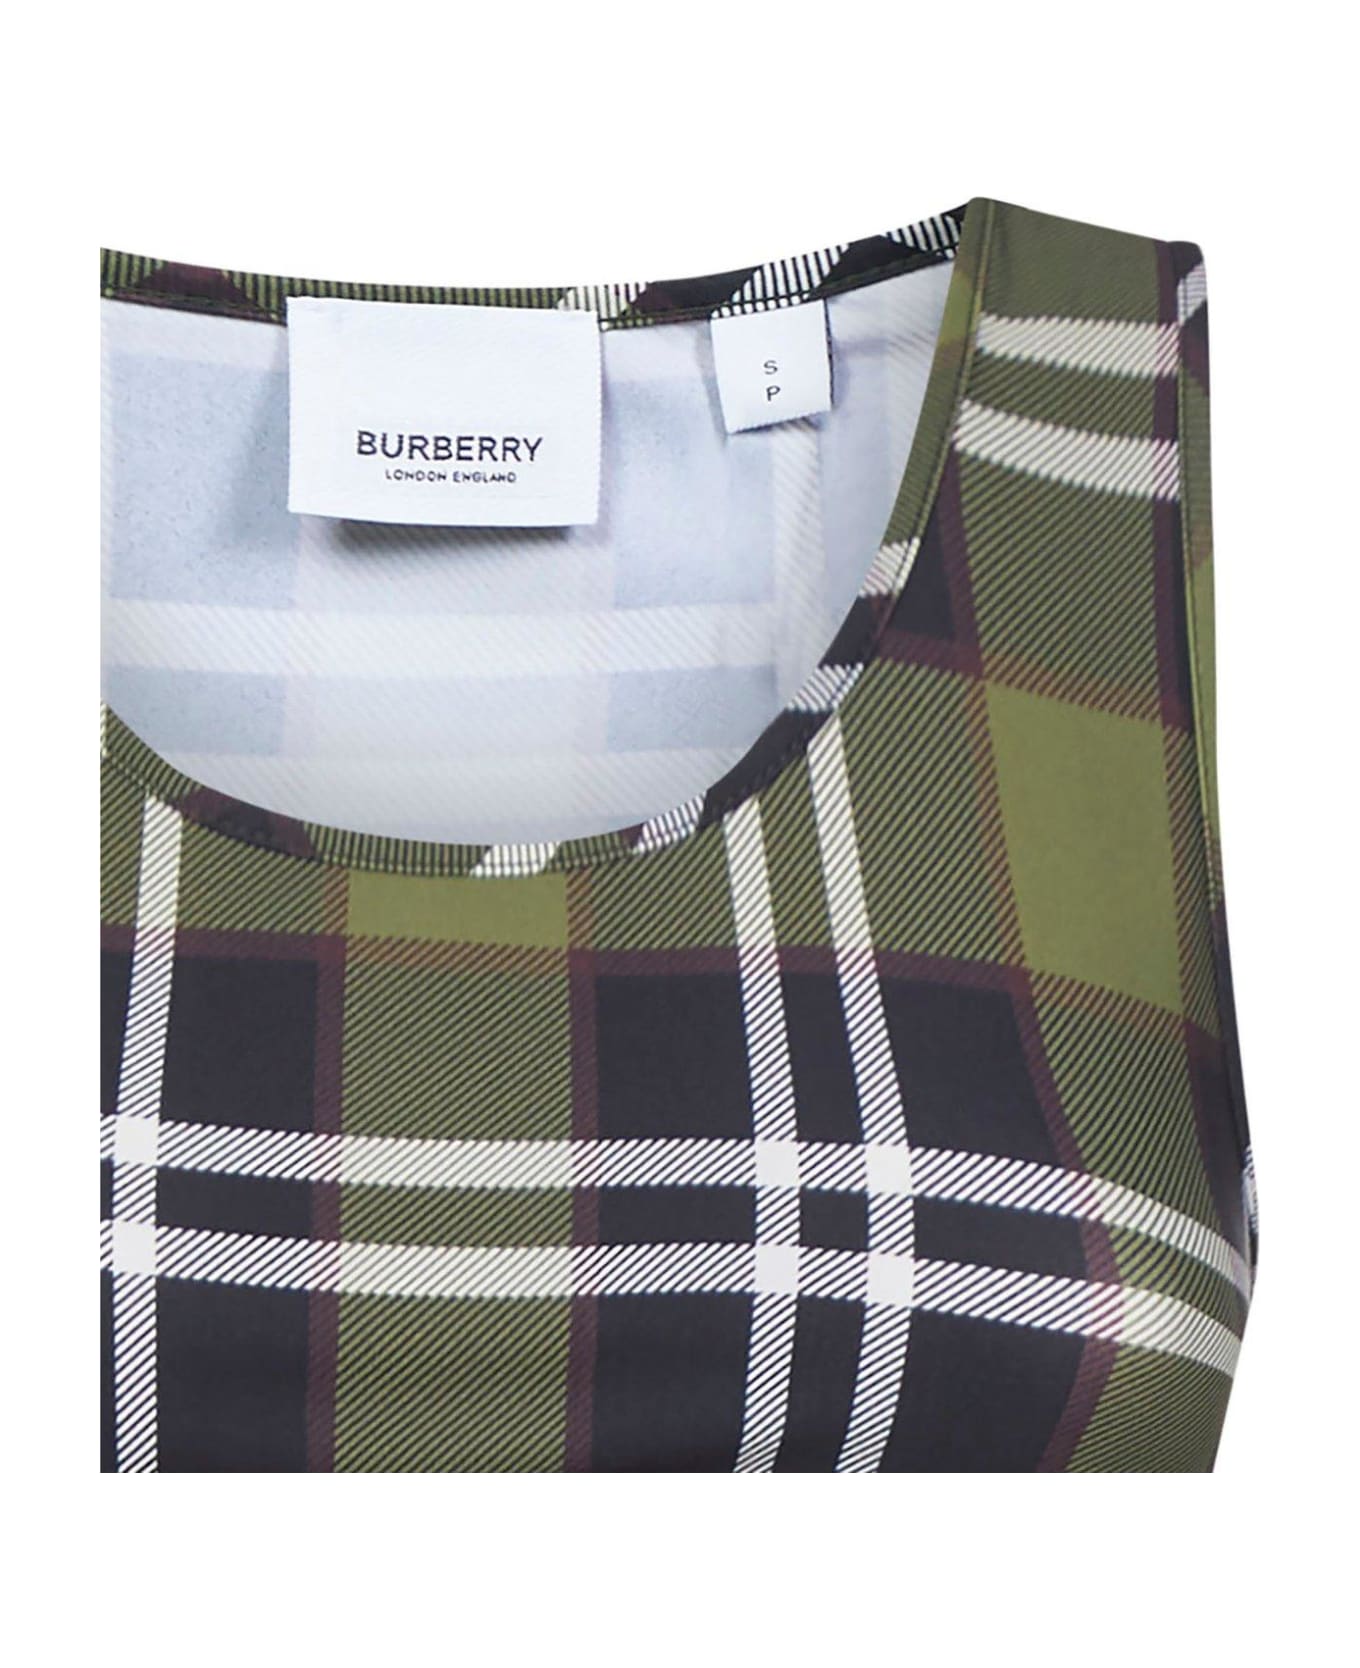 Burberry Checked Cropped Tank Top - MULTICOLOUR タンクトップ